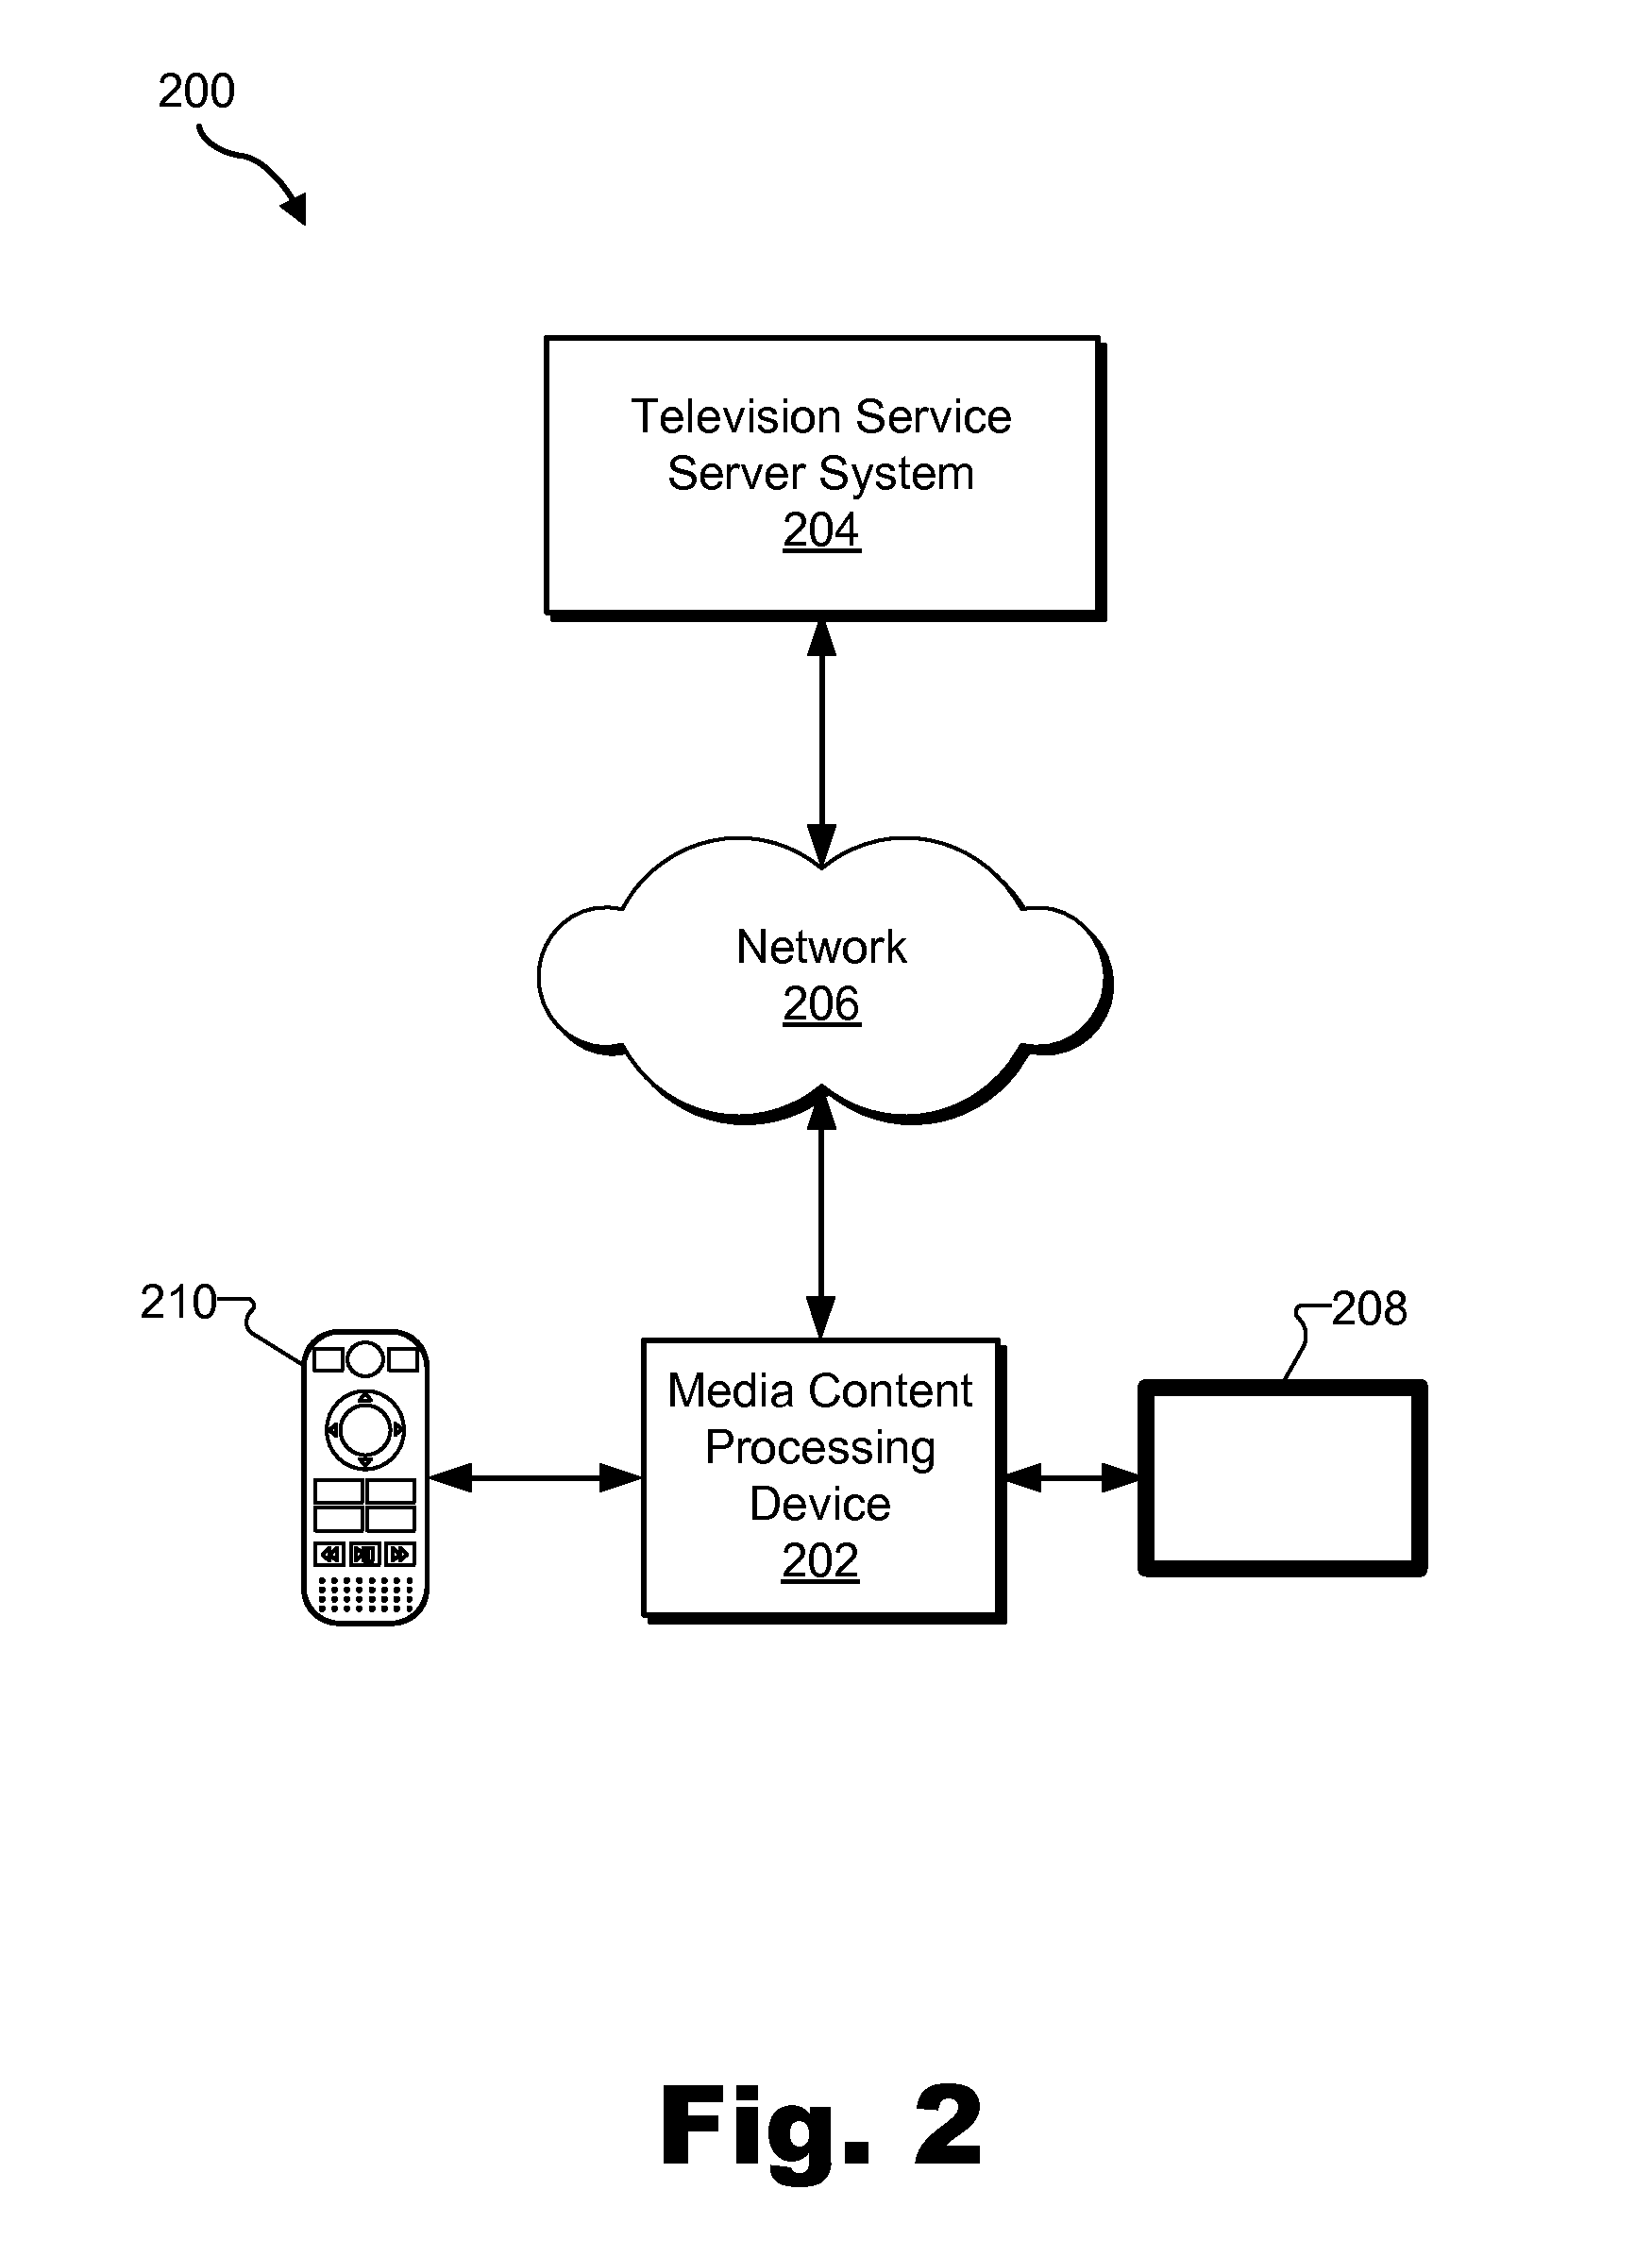 Methods and Systems for Providing Context-Based Customer Support for a User Interface View Associated with a Television Service